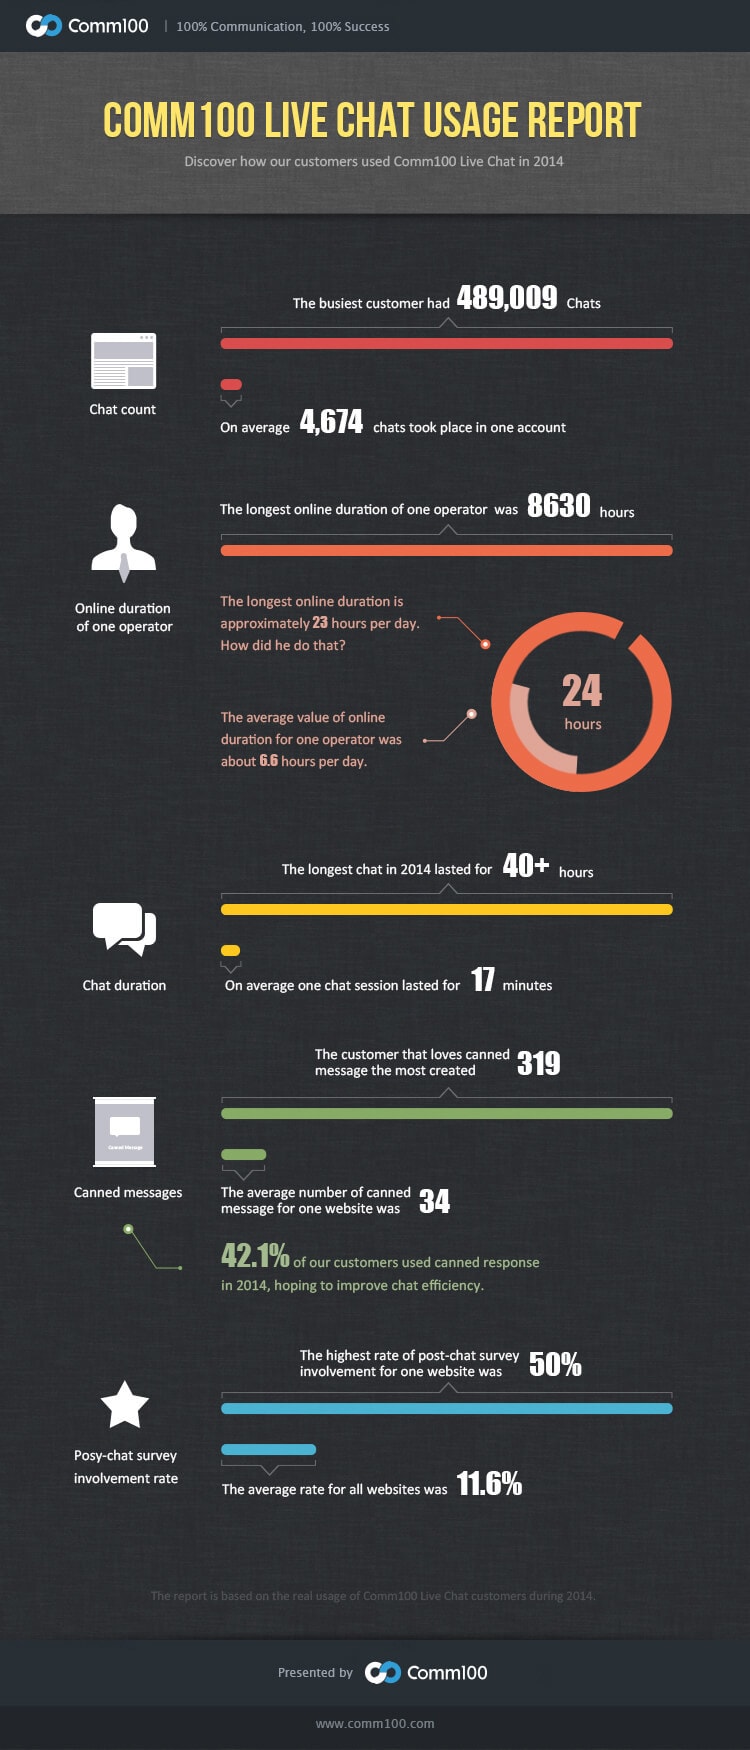 comm100 live chat usage 2014 - infographic